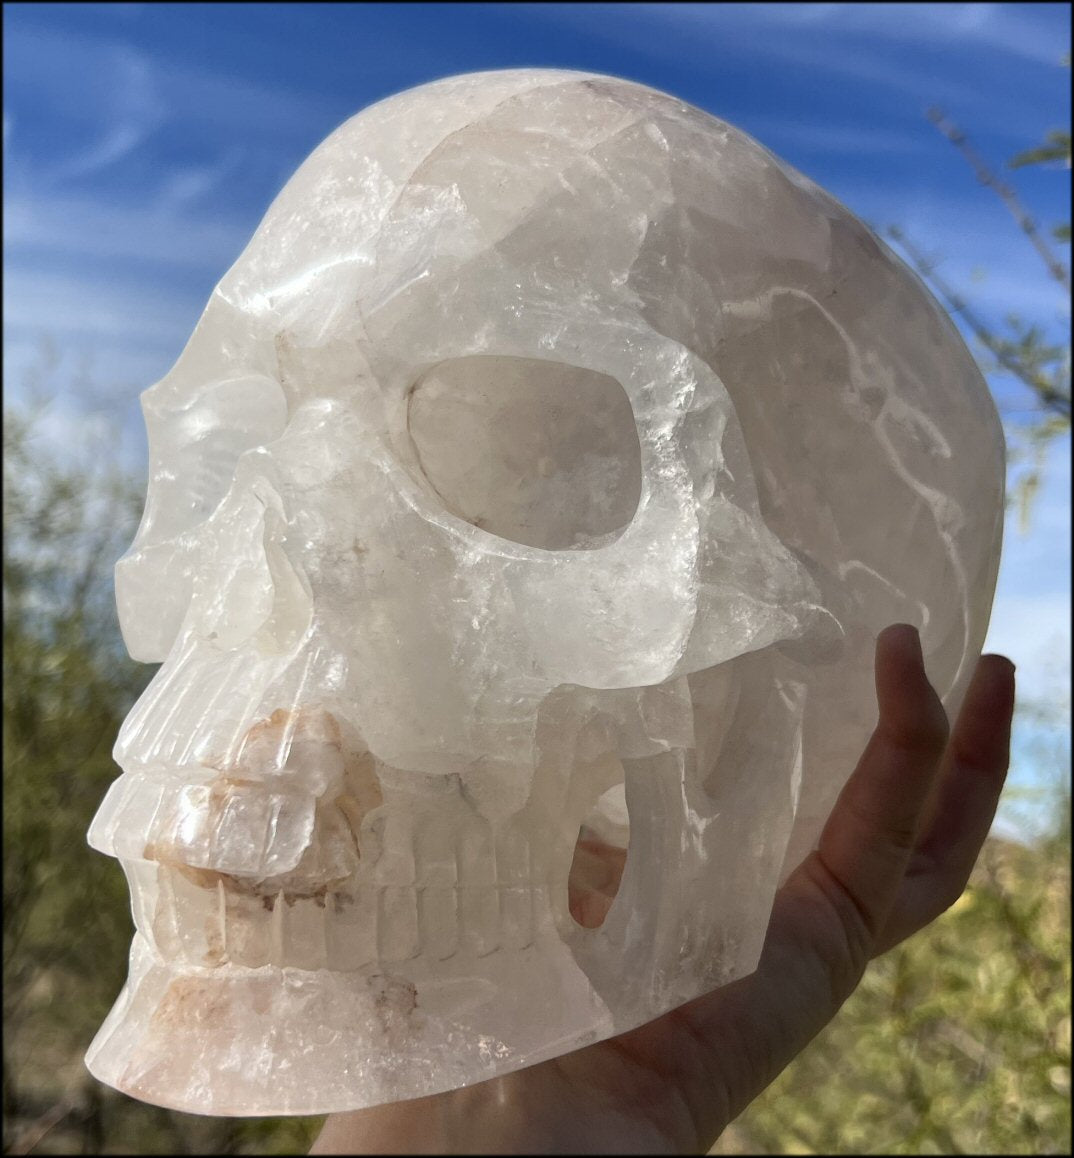 LifeSize Himalayan Quartz Crystal Skull with Gorgeous Hematite inclusions, Shimmery Rainbows - 15lbs+